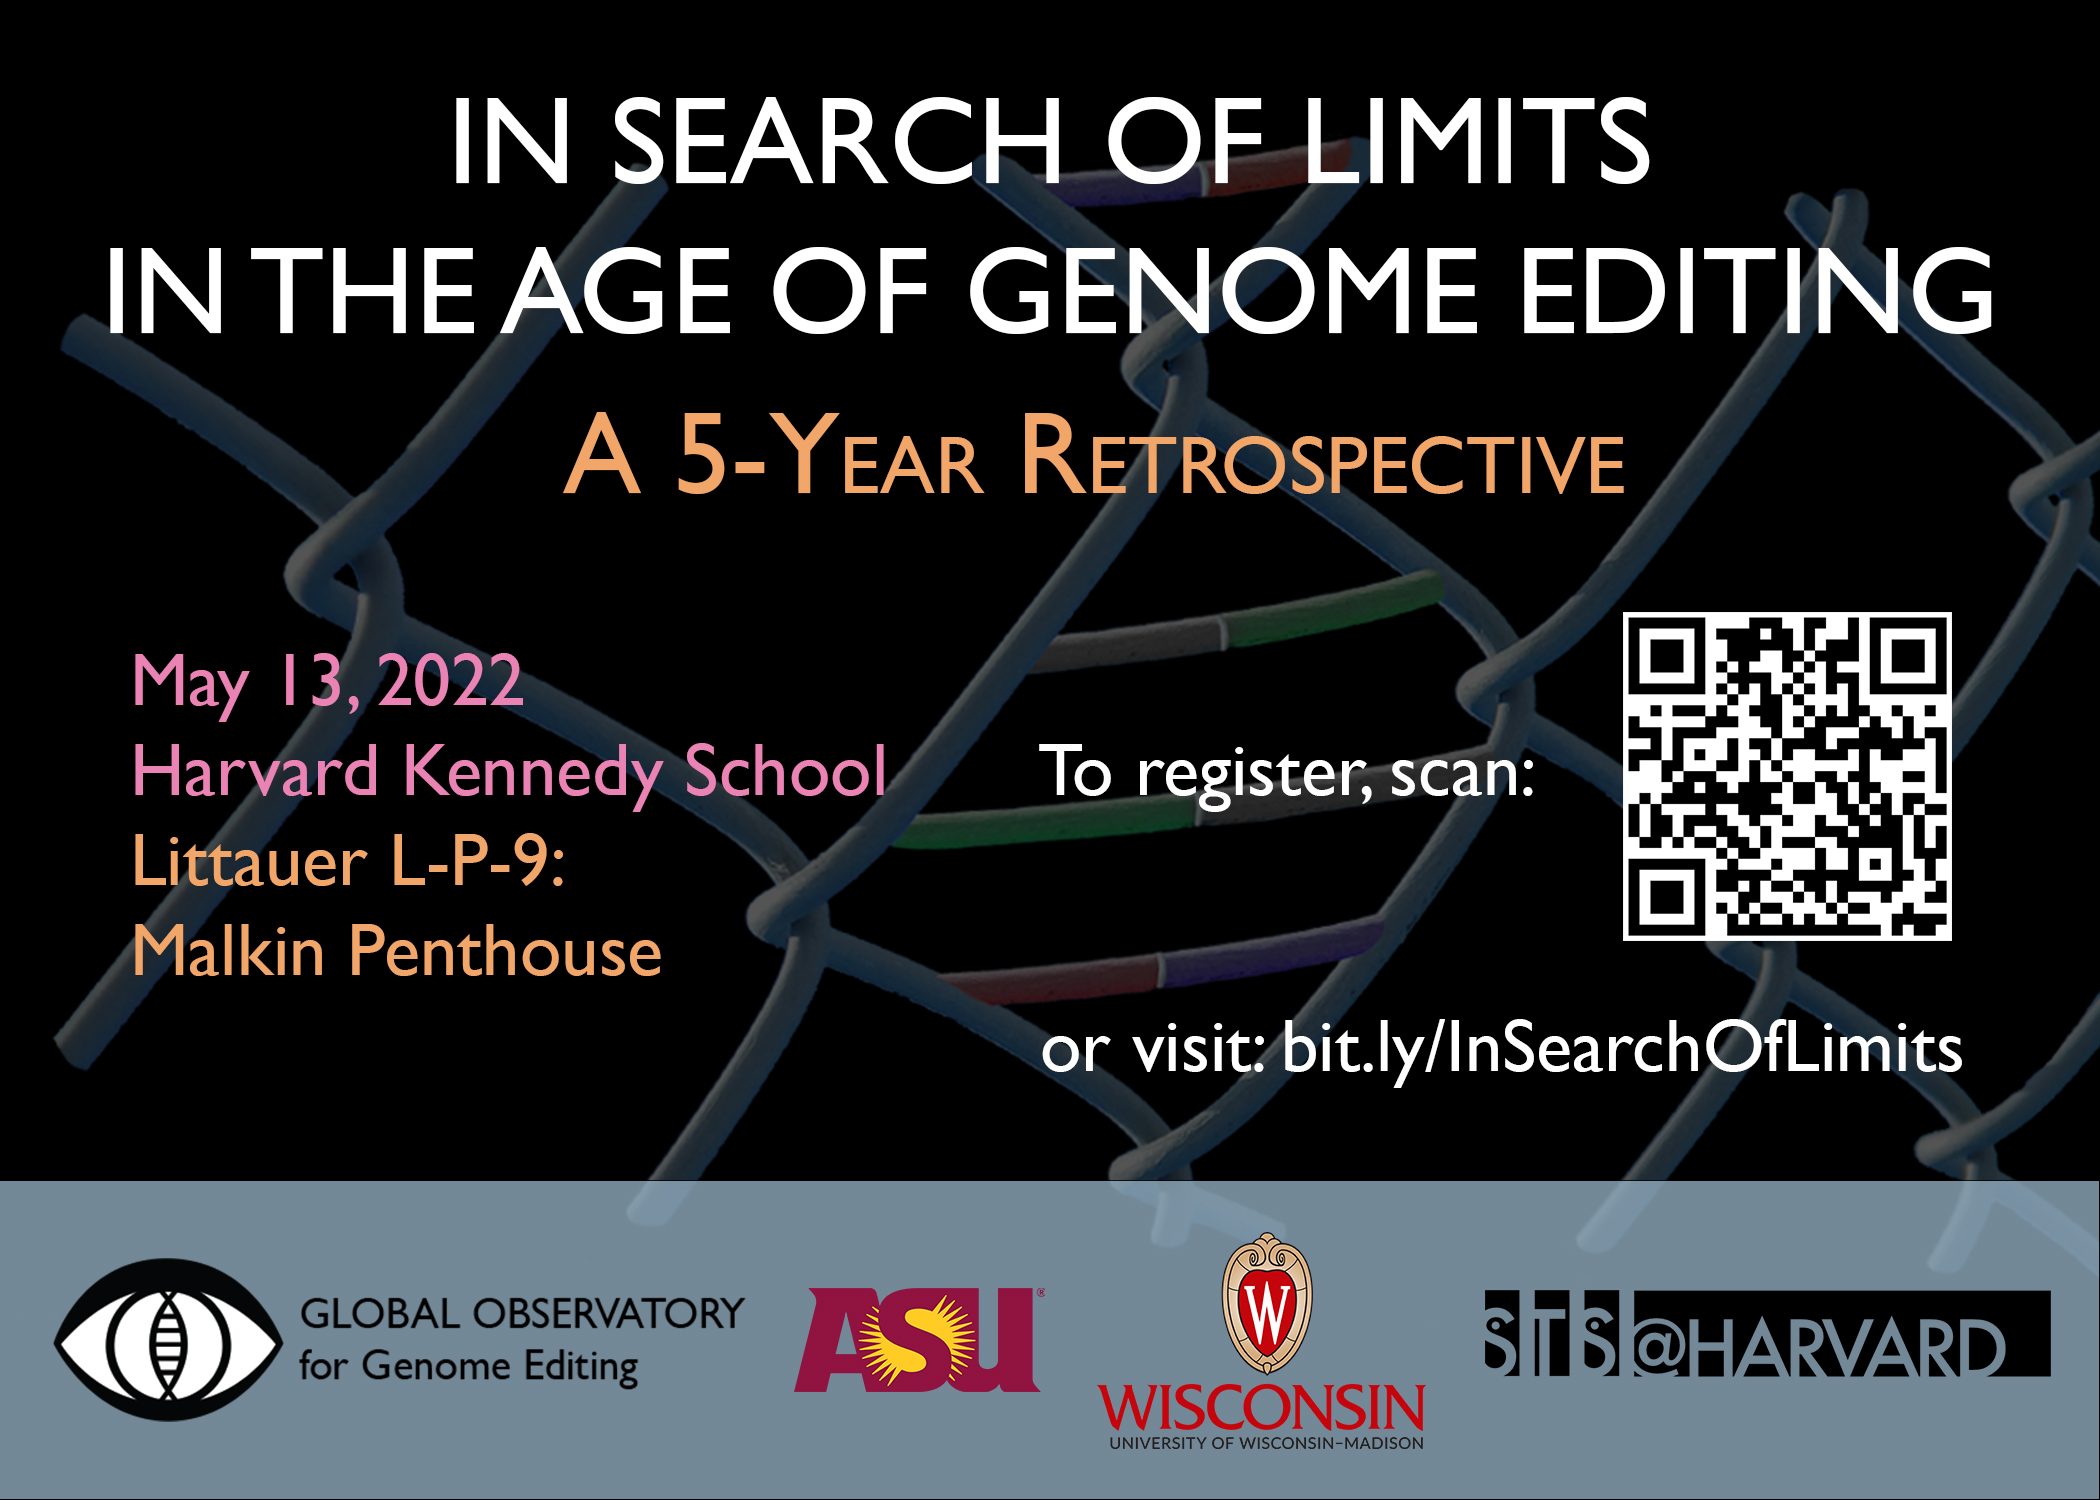 In Search of Limits in the Age of Genomic Editing: A 5-year Retrospective event poster